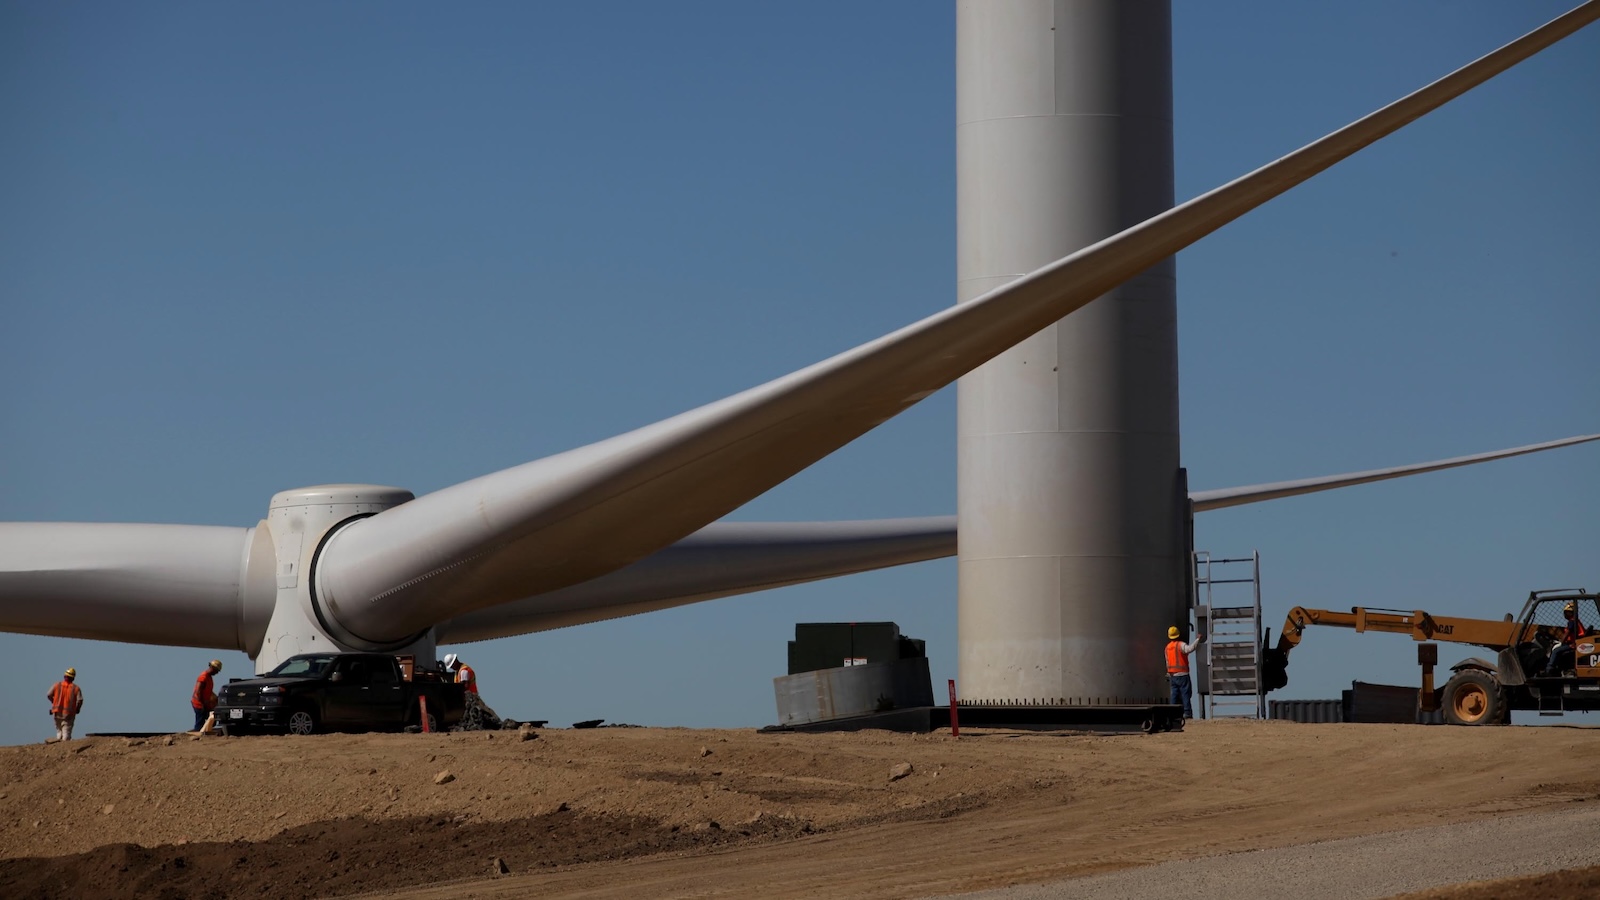 Crews on the ridge are preparing to install a giant rotor on a wind turbine at Altamont Pass in the San Francisco Bay Area.